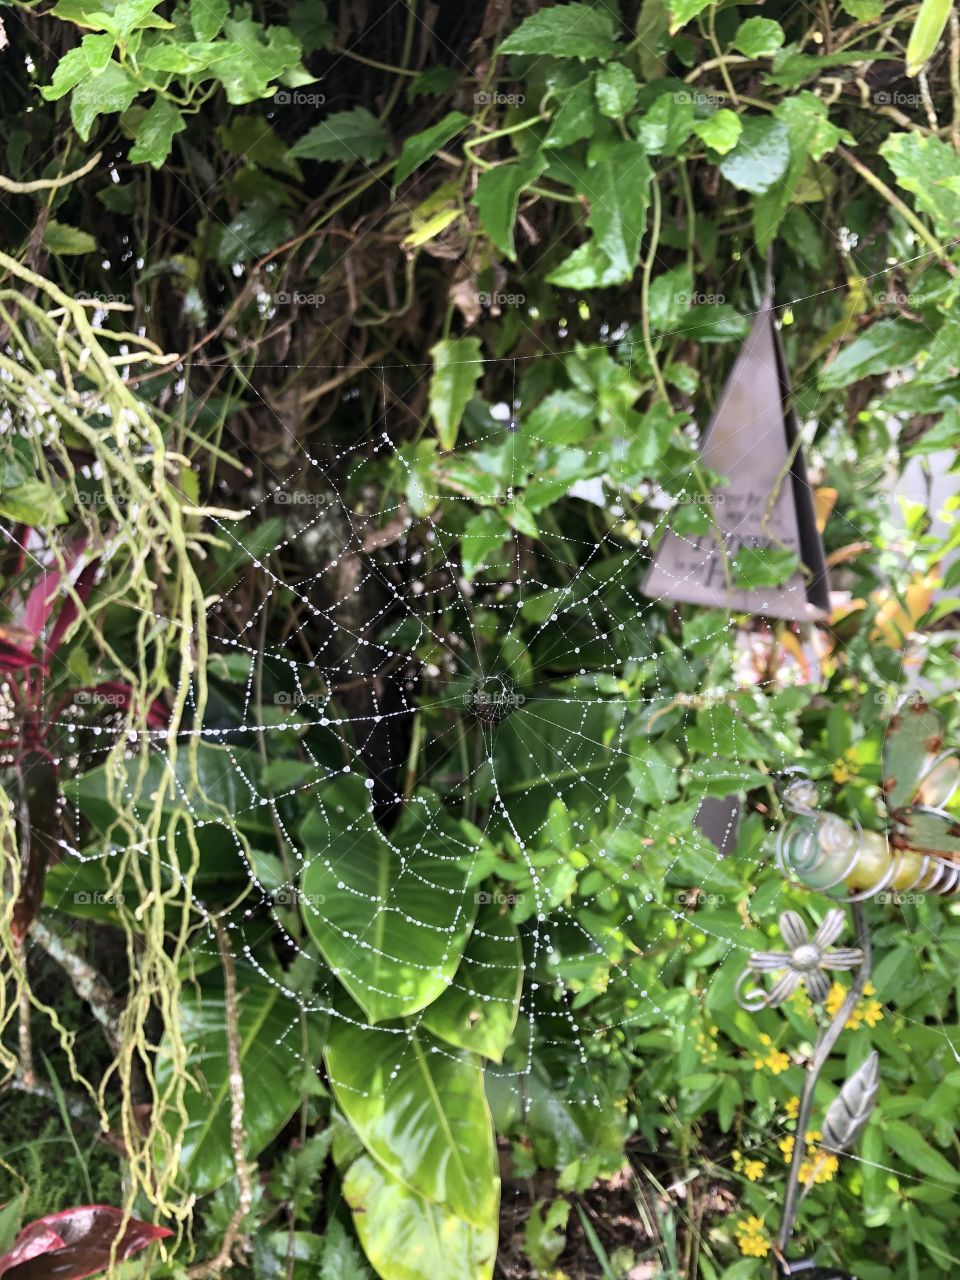 A perfect Spider web